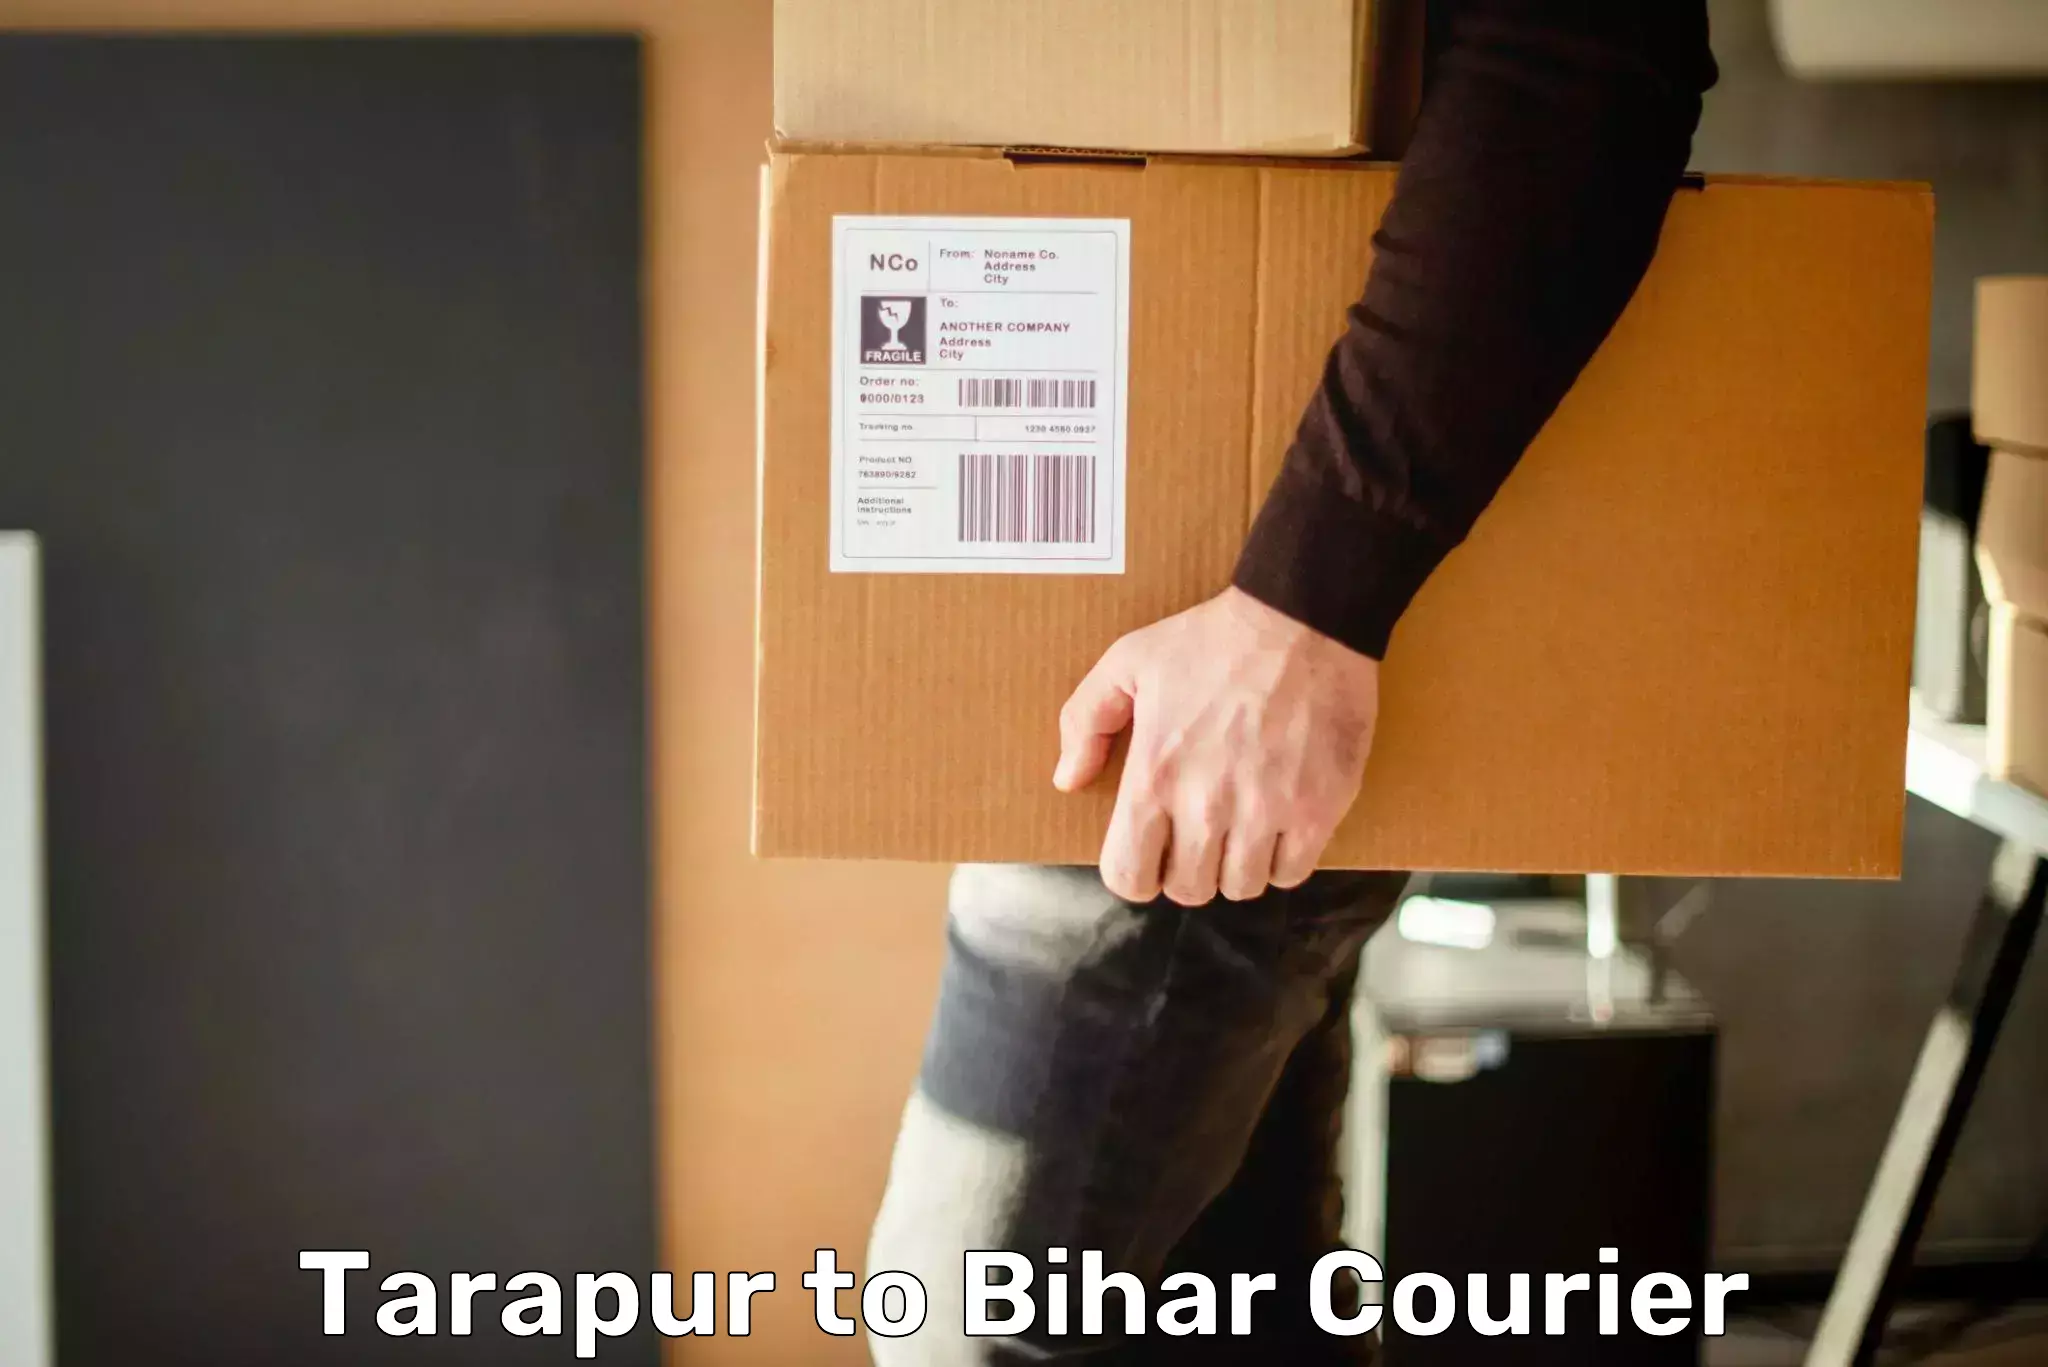 Courier service booking Tarapur to Patna